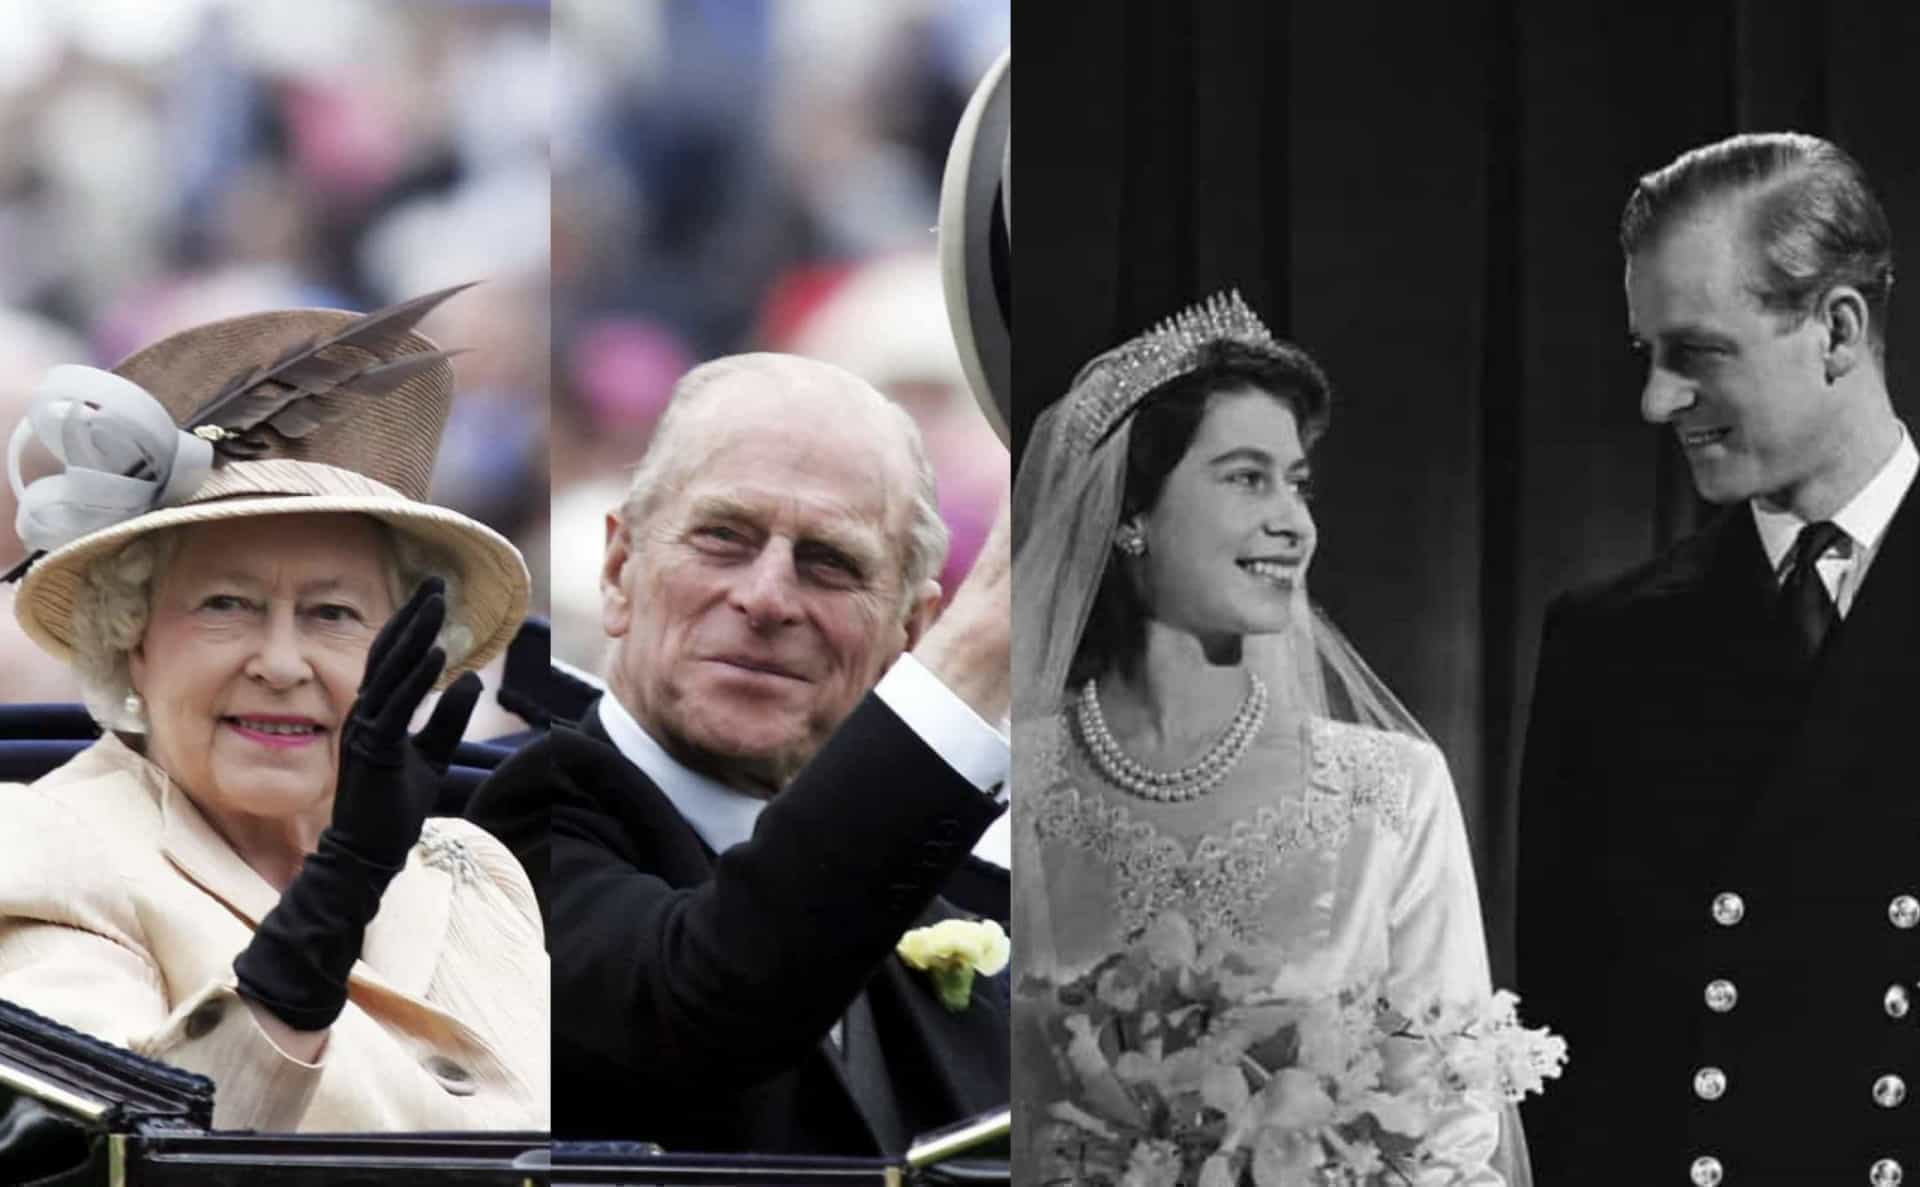 <p>The marriage of Queen Elizabeth II and Prince Philip, Duke of Edinburgh was the longest <a href="https://www.starsinsider.com/lifestyle/450359/the-royal-weddings-that-changed-european-history" rel="noopener">royal marriage</a> in British history. But when Princess Elizabeth married Prince Philip of Greece and Denmark on November 20, 1947, she likely didn't expect it to endure for over 70 years, along with her record-breaking reign. </p> <p>Sadly, Prince Philip passed away in April 2021 at the age of 99, and Queen Elizabeth joined him on September 8, 2022, after a year of ill health following his death. Nonetheless, it was a beautiful journey. Browse this gallery and take a look back at this most endearing of royal love stories.</p><p>You may also like:<a href="https://www.starsinsider.com/n/119097?utm_source=msn.com&utm_medium=display&utm_campaign=referral_description&utm_content=705778en-za"> Harmful to health: the hidden hazards of food and drink </a></p>